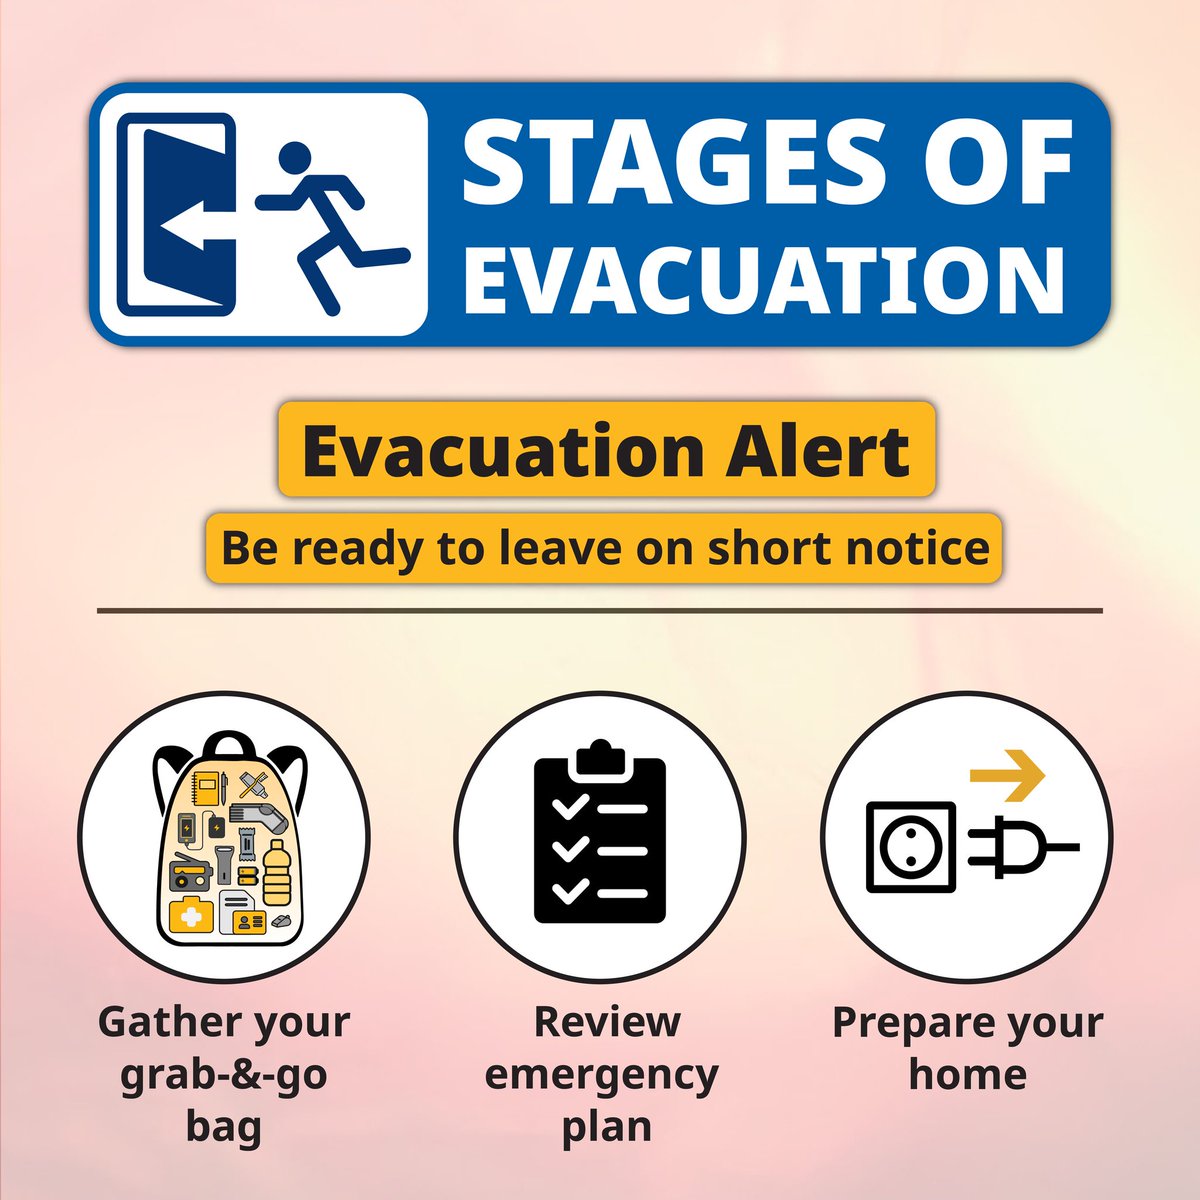 Know what to do in case of a #BCwildfire Evacuation Alert or Order: Alert: be ready to leave on short notice. Have your grab-&-go bags ready & connect w/ loved ones ✅ Order: leave the area immediately w/ your grab-&-go bag✅ Rescind: the threat to life & safety has passed ✅